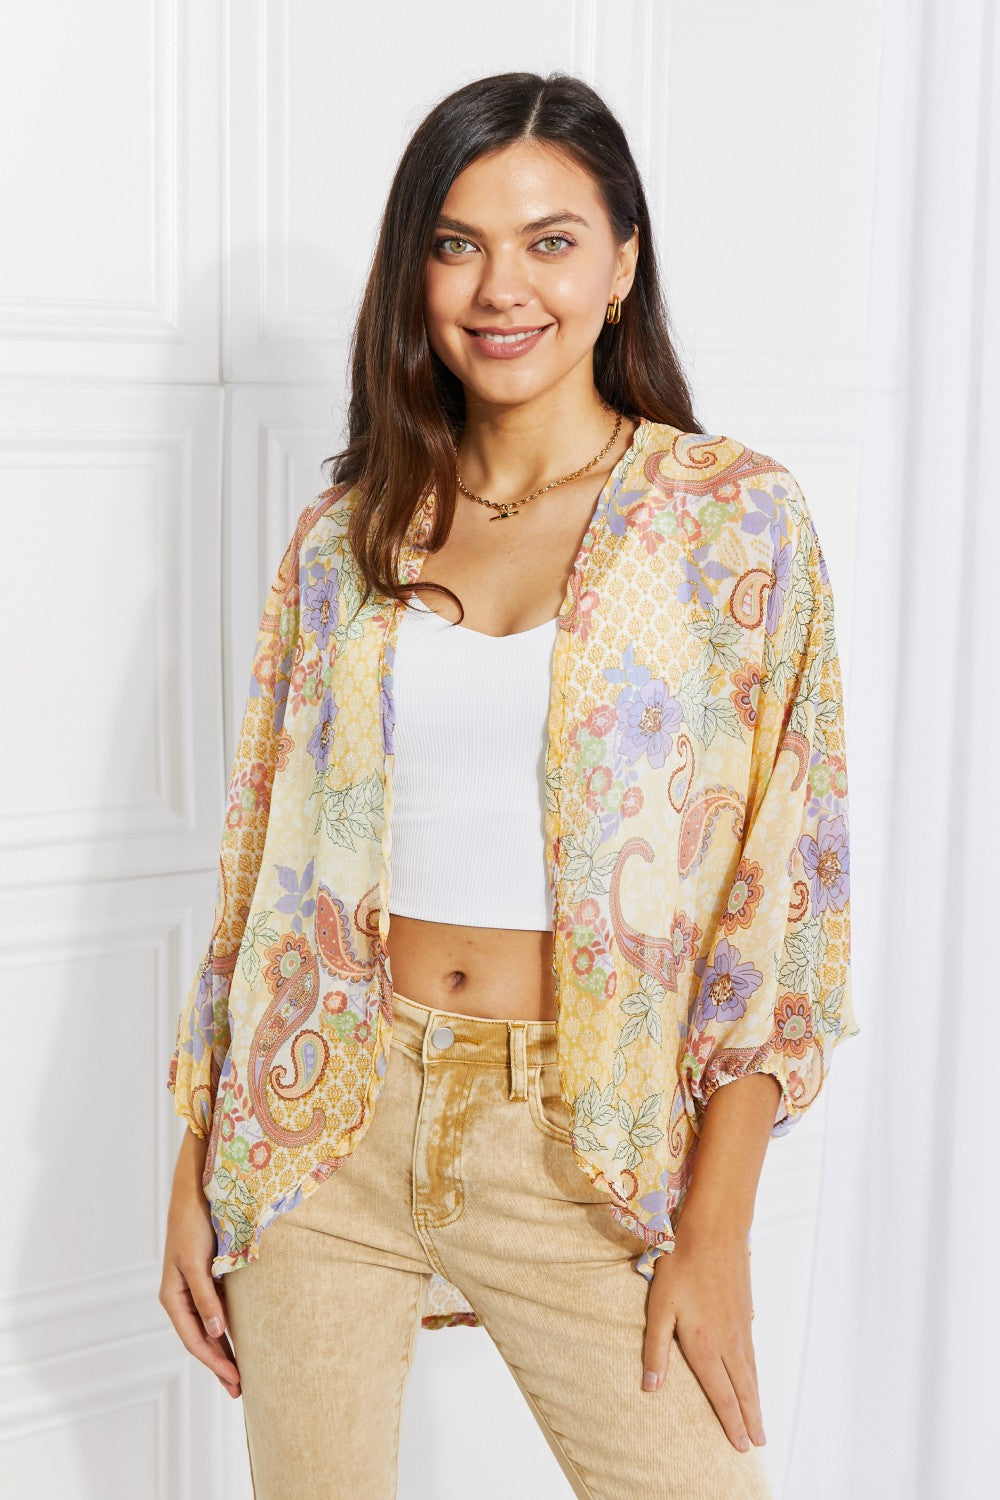 PASTEL YELLOW - Culture Code Full Size Lasting Love Paisley Kimono - Ships from The US - womens kimono at TFC&H Co.